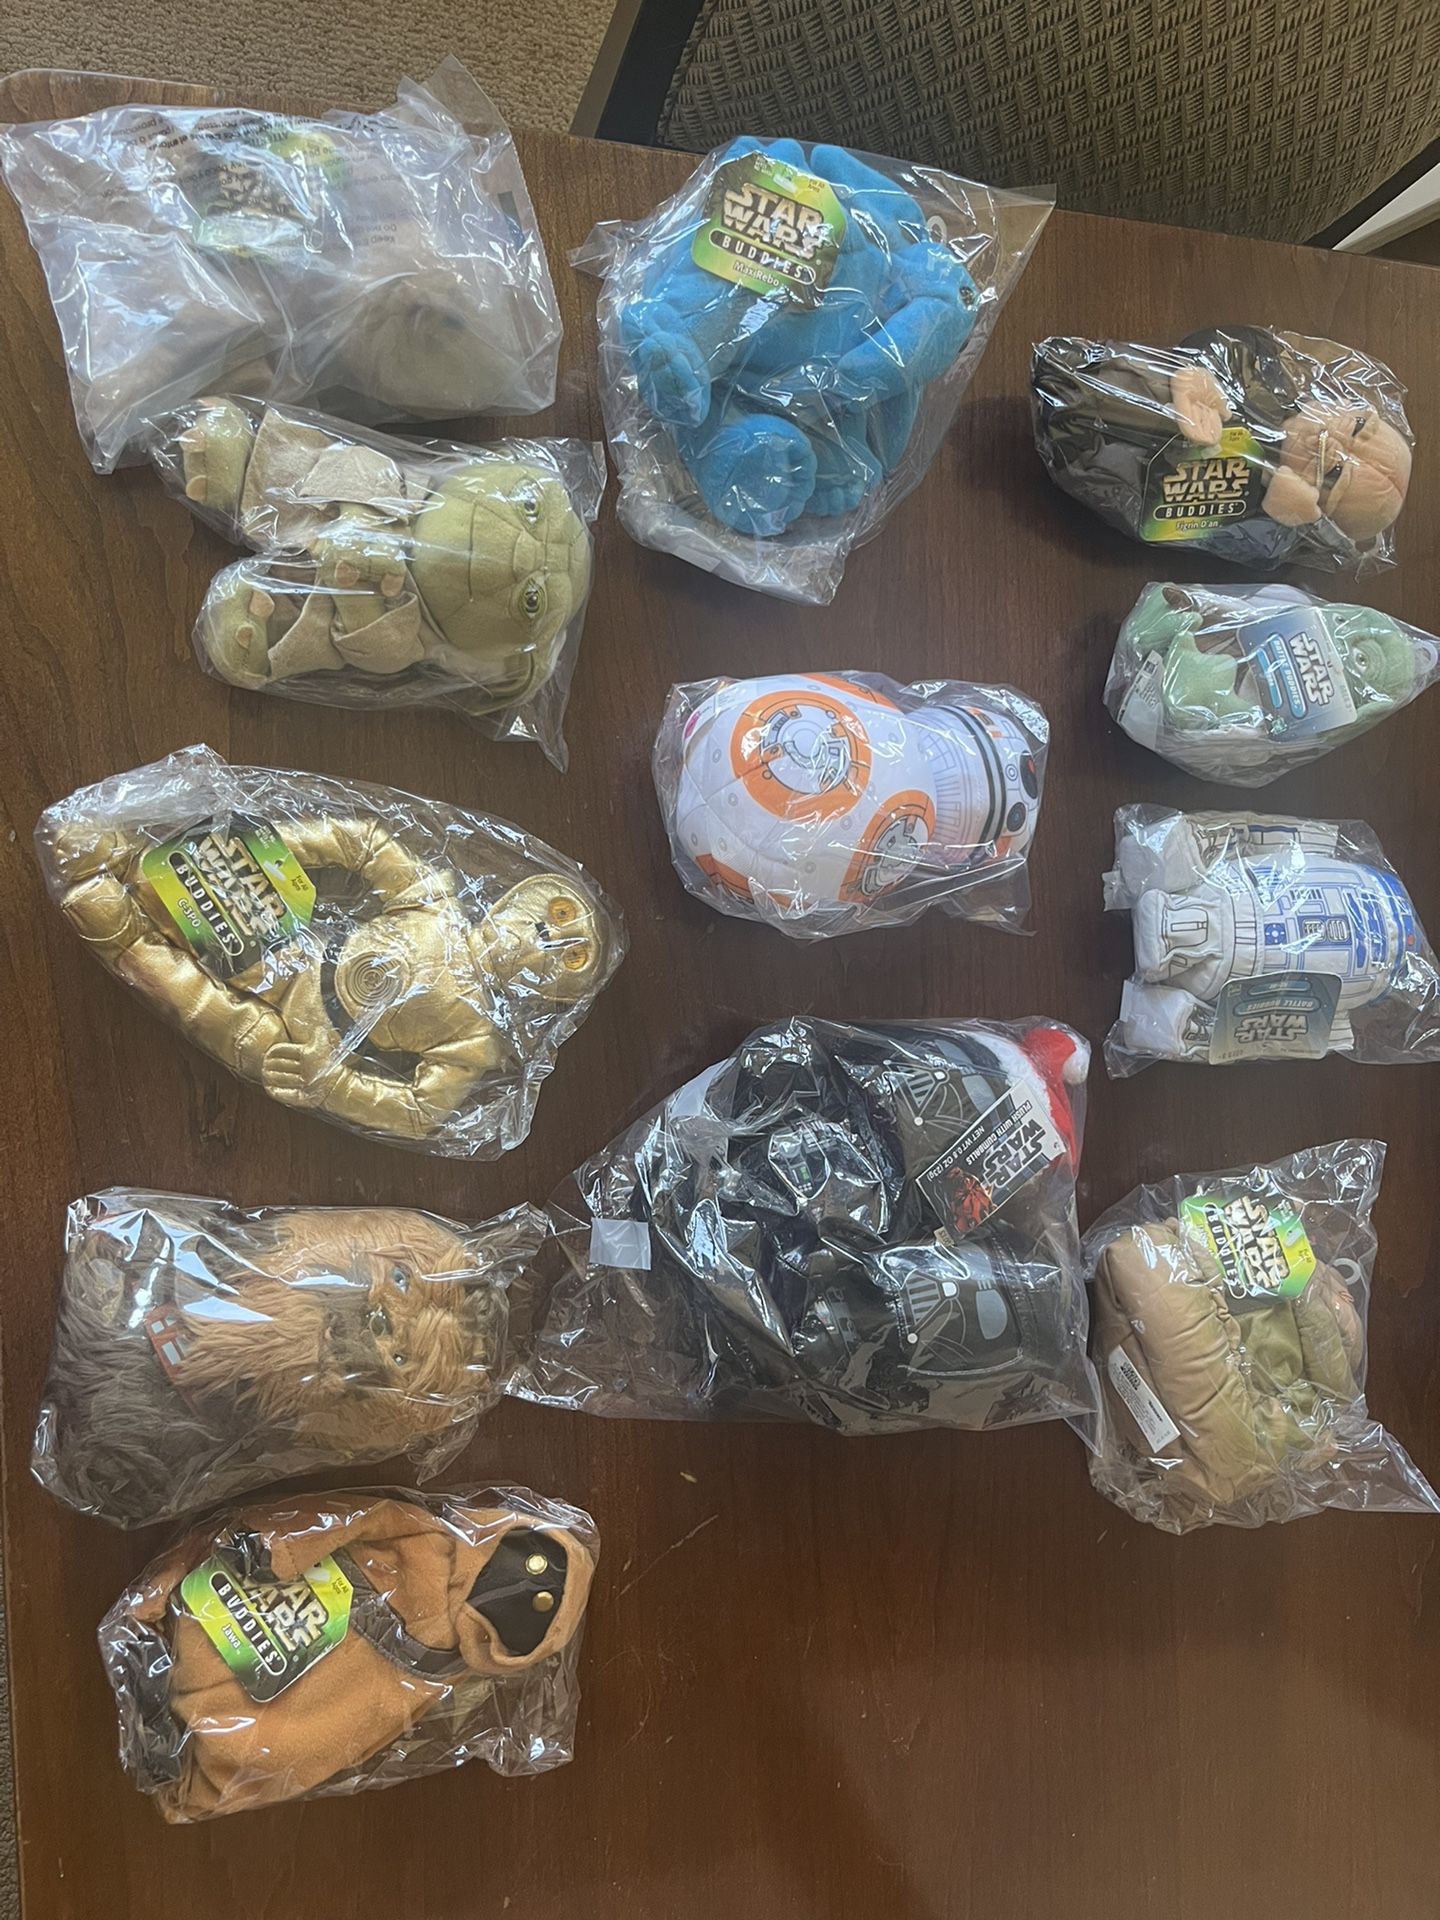 Vintage 1997 Star Wars Plush Toys And Beanies And More!